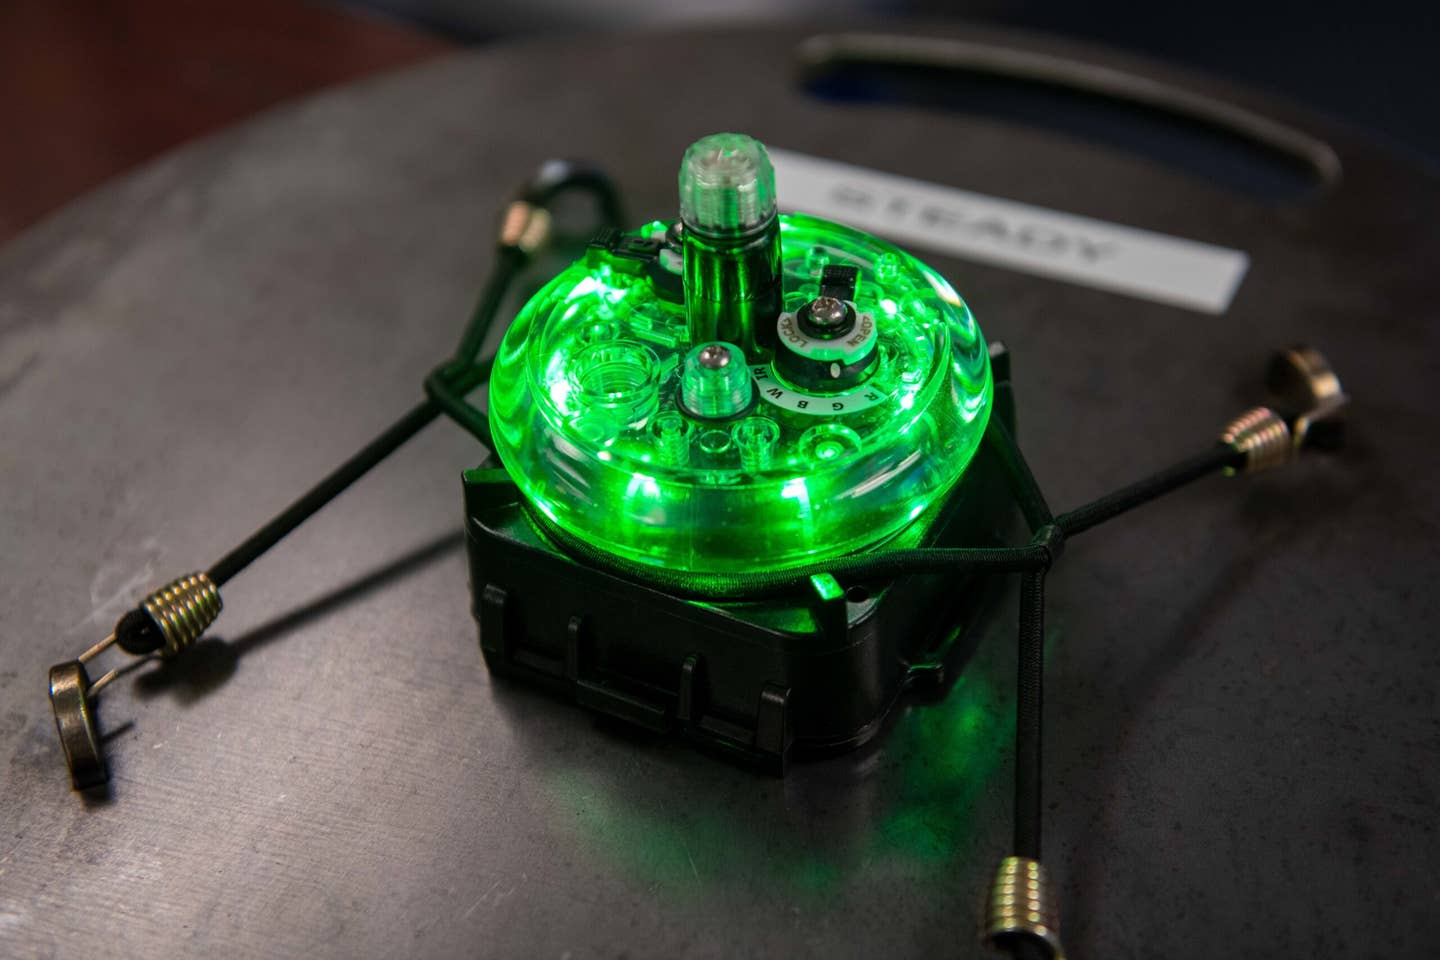 A Phantom ALZ-15 portable landing zone light designed by Phantom Products, Inc. These lights are small, lightweight, and can be quickly deployed as part of an AMP system to mark temporary landing zones for aircraft. <em>Credit: U.S. Air Force photo by Staff Sgt. Adam Goodly</em>